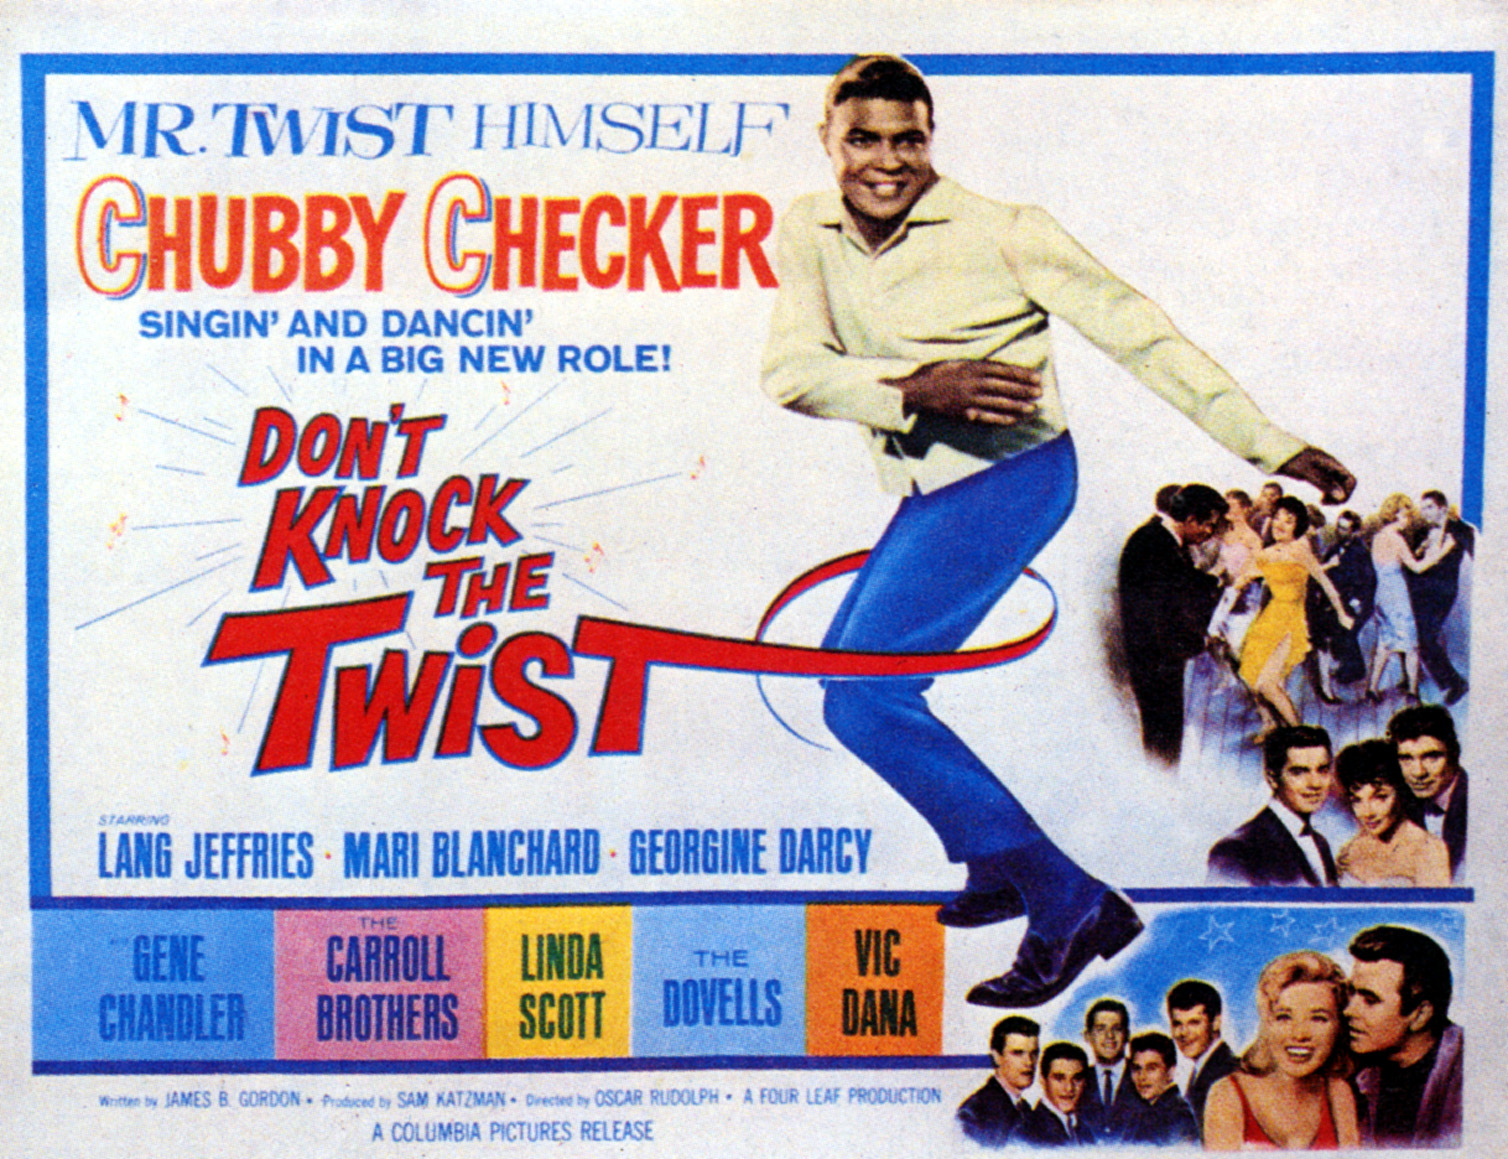 A poster depicting Chubby Checker